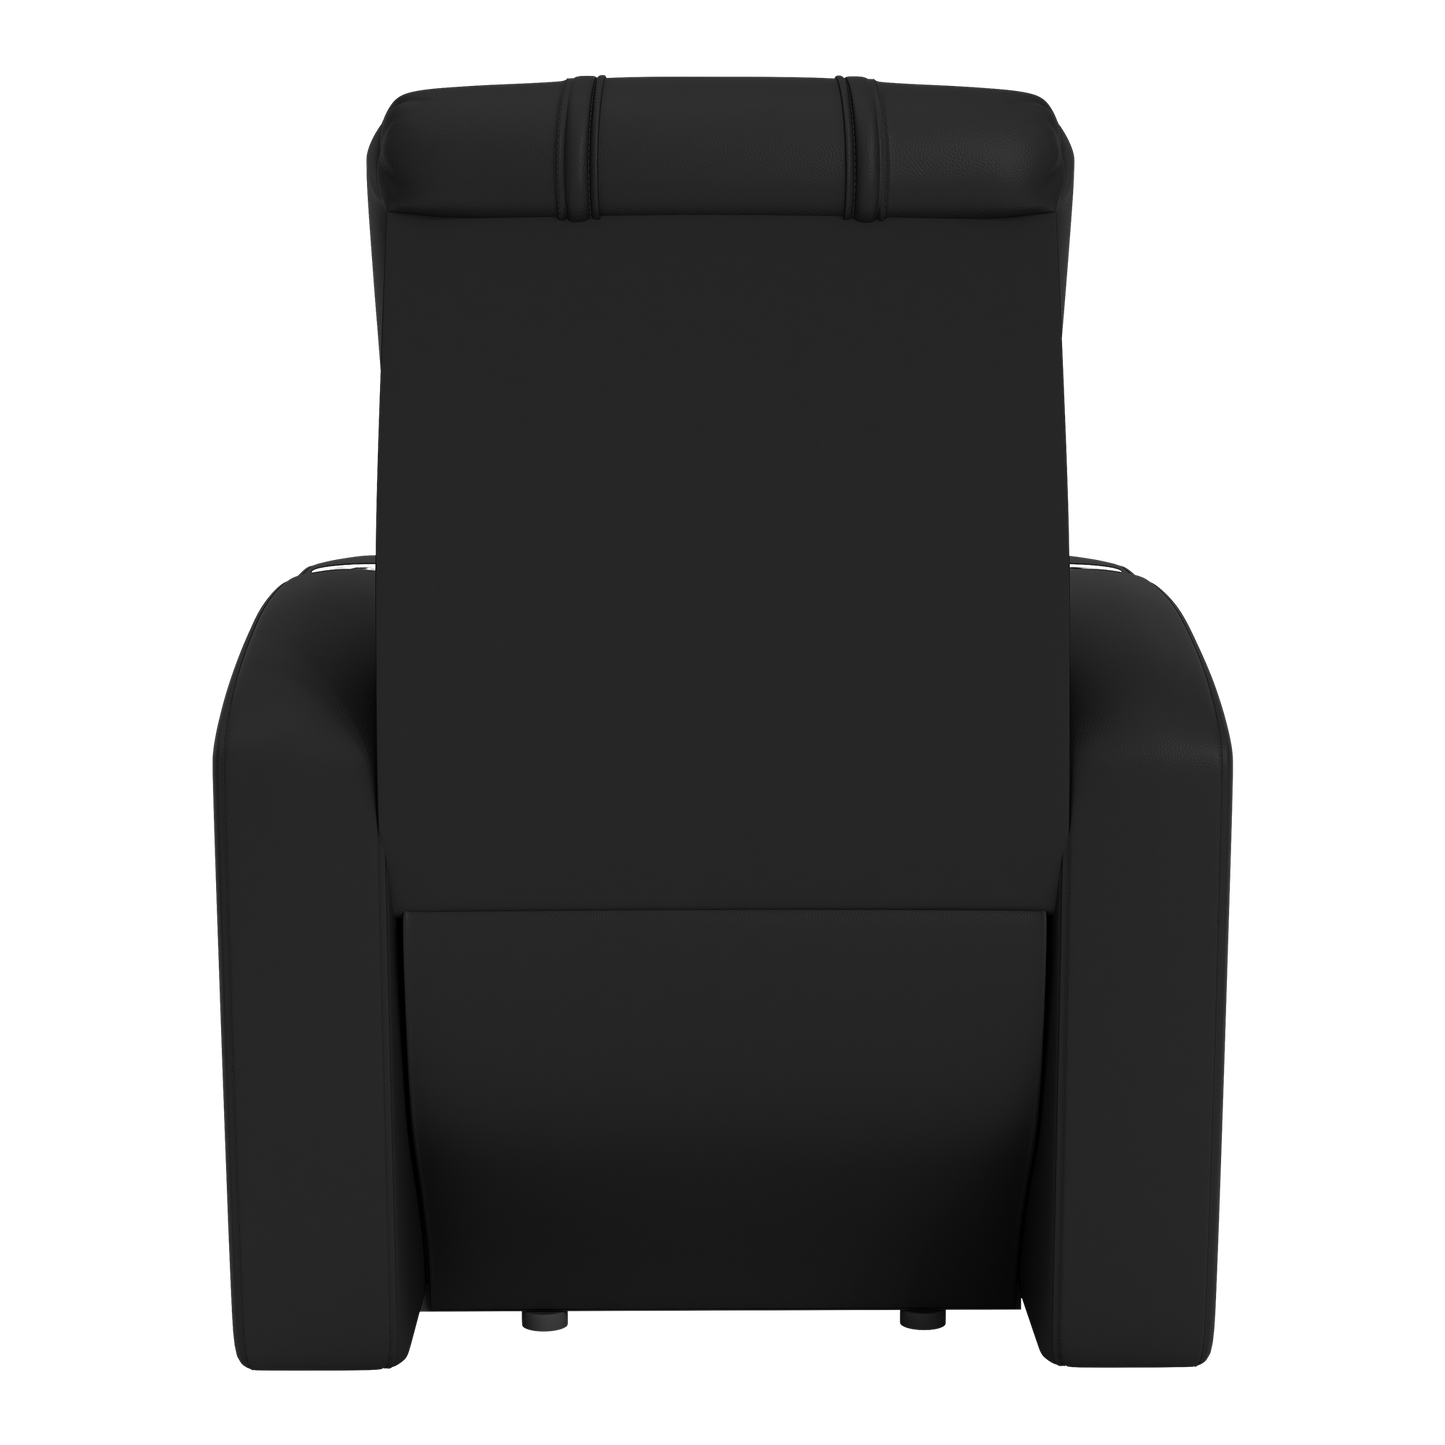 Stealth Recliner with St Louis Blues Logo